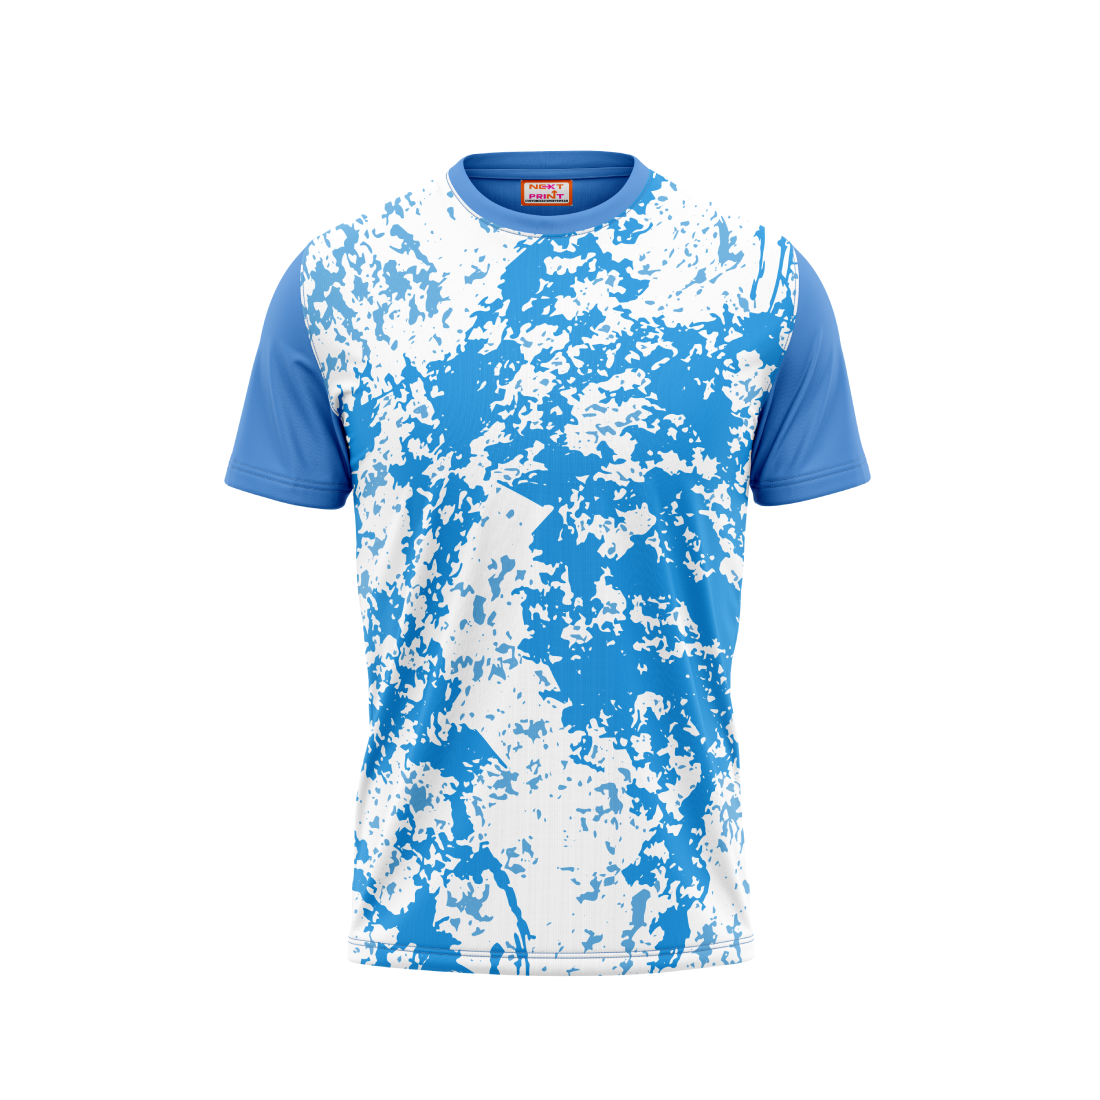 Round Neck Printed Jersey Skyblue NP5000031